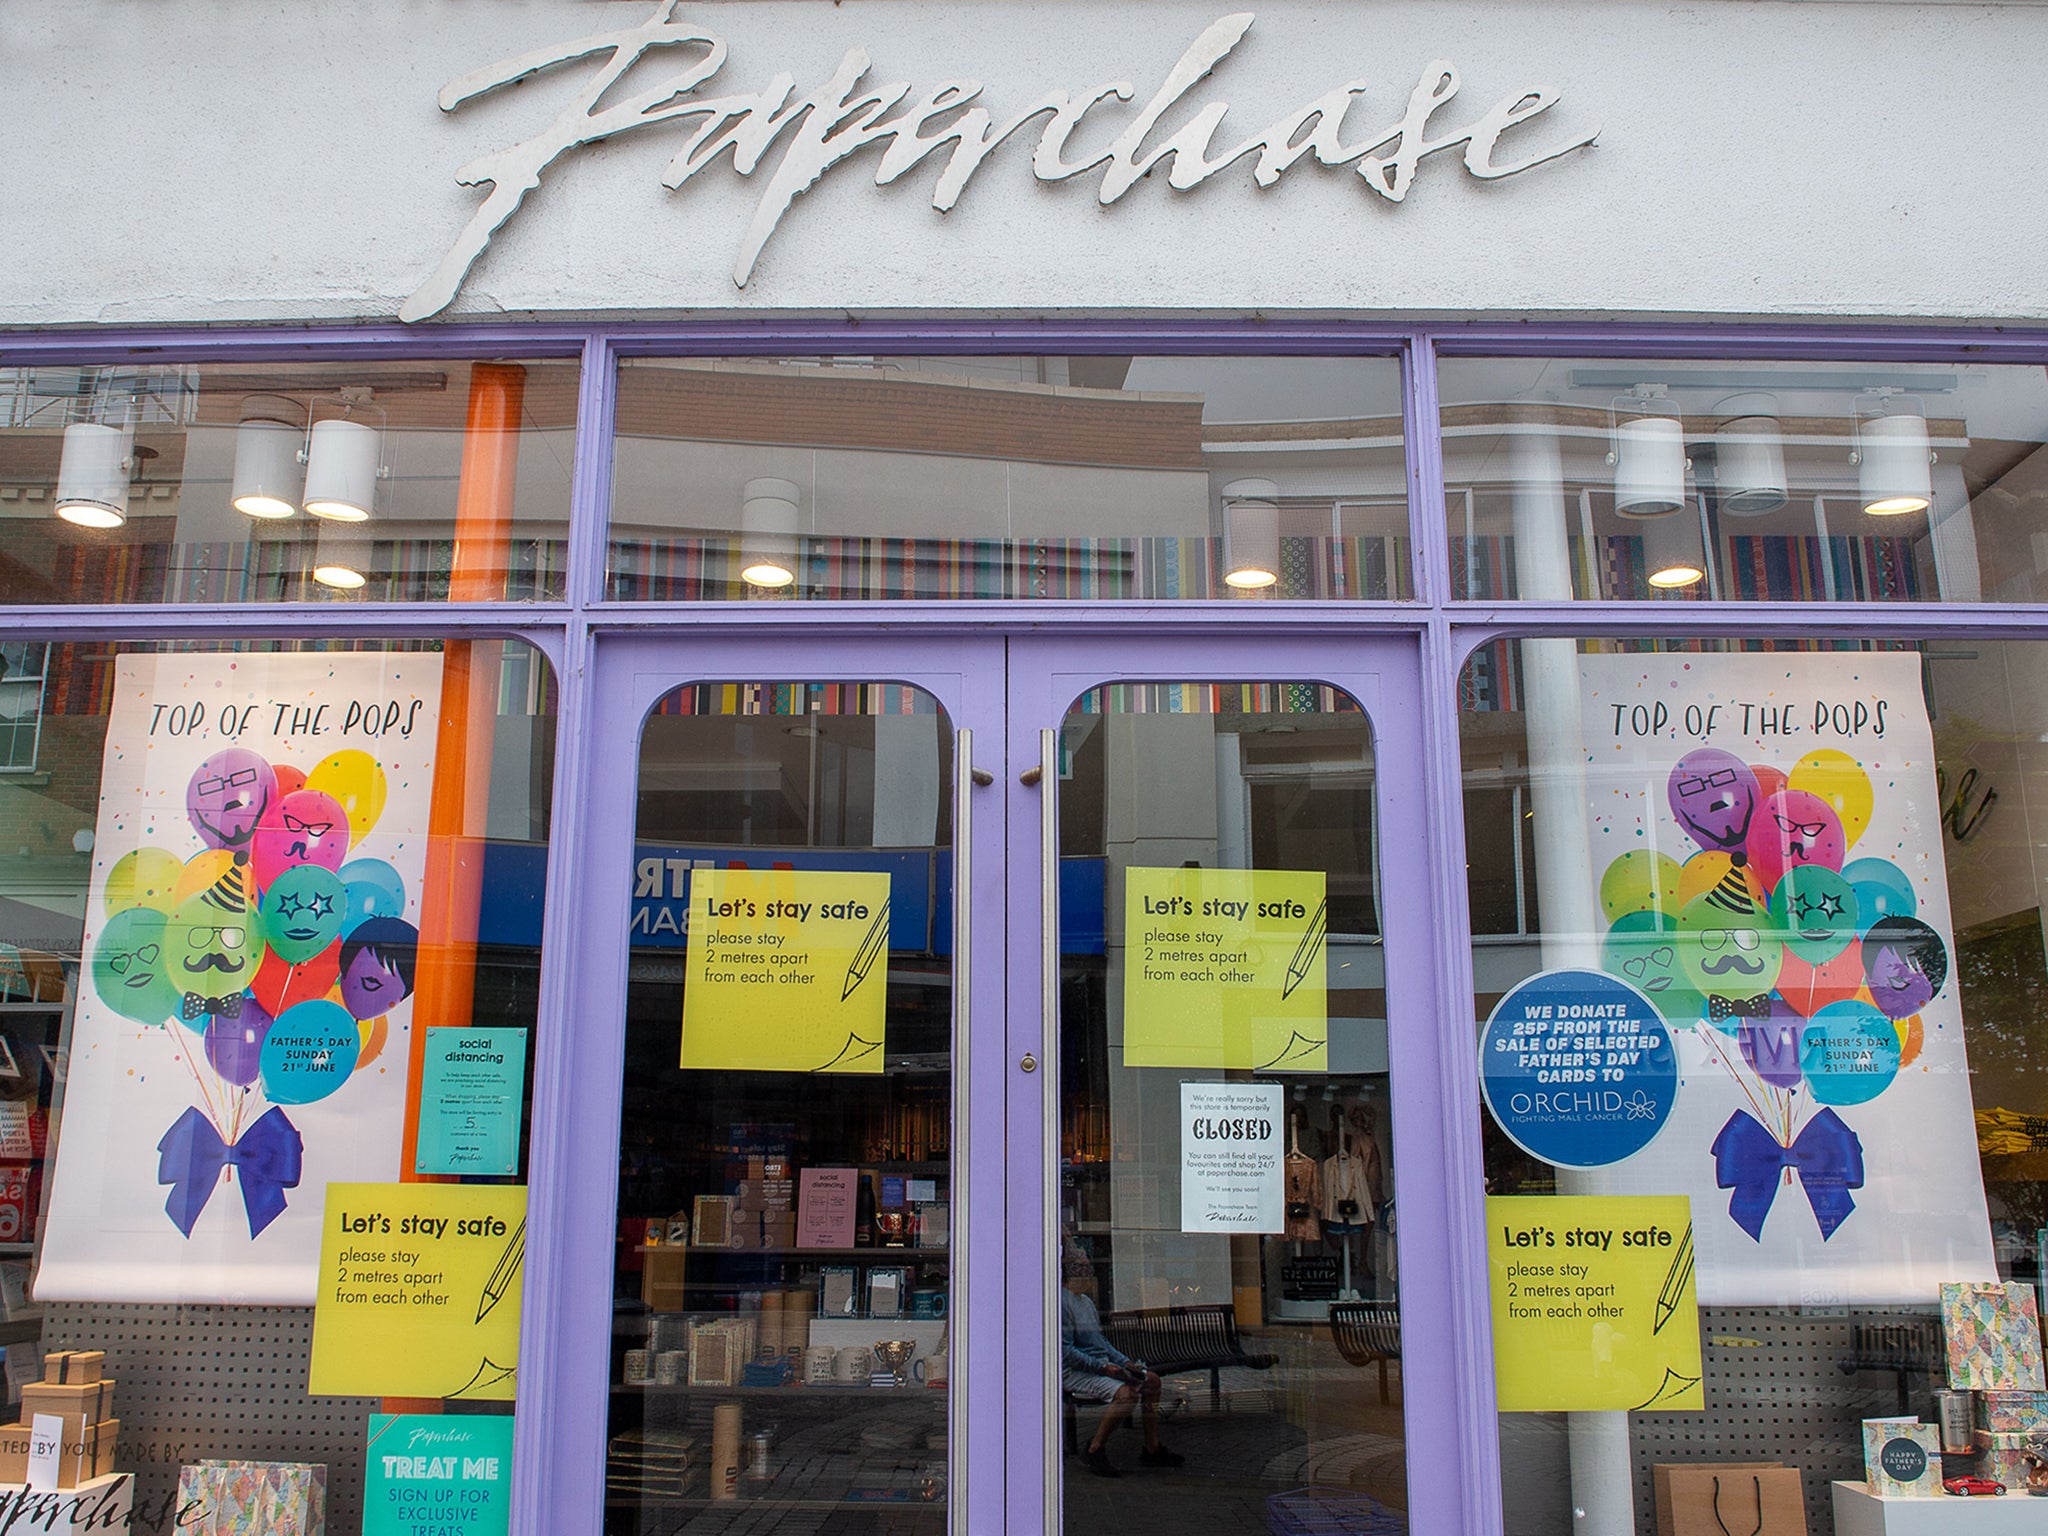 Paperchase has 127 shops and about 1,500 employees